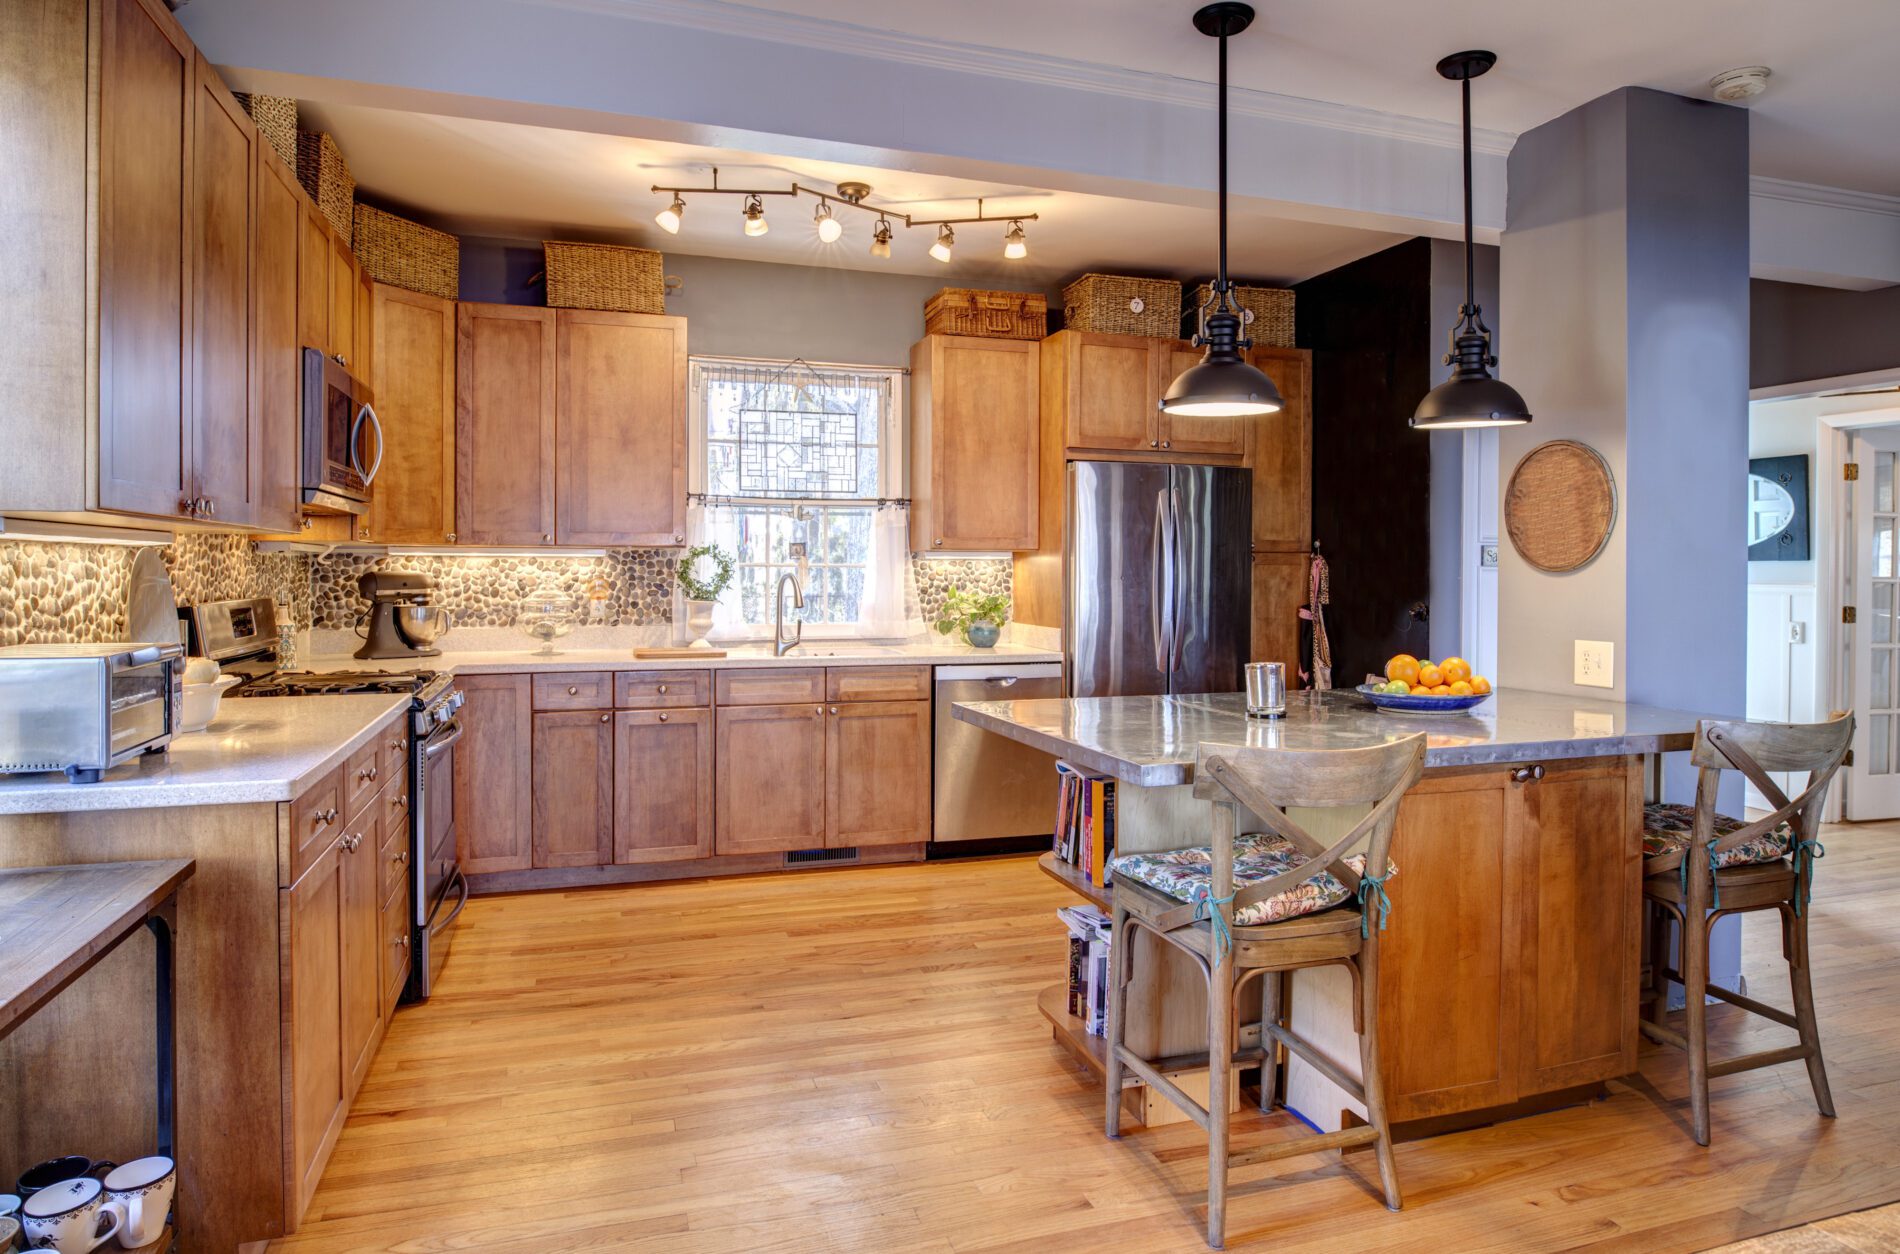 No.1 Best Frisco Kitchen Remodeling in Dallas- Floor Accents